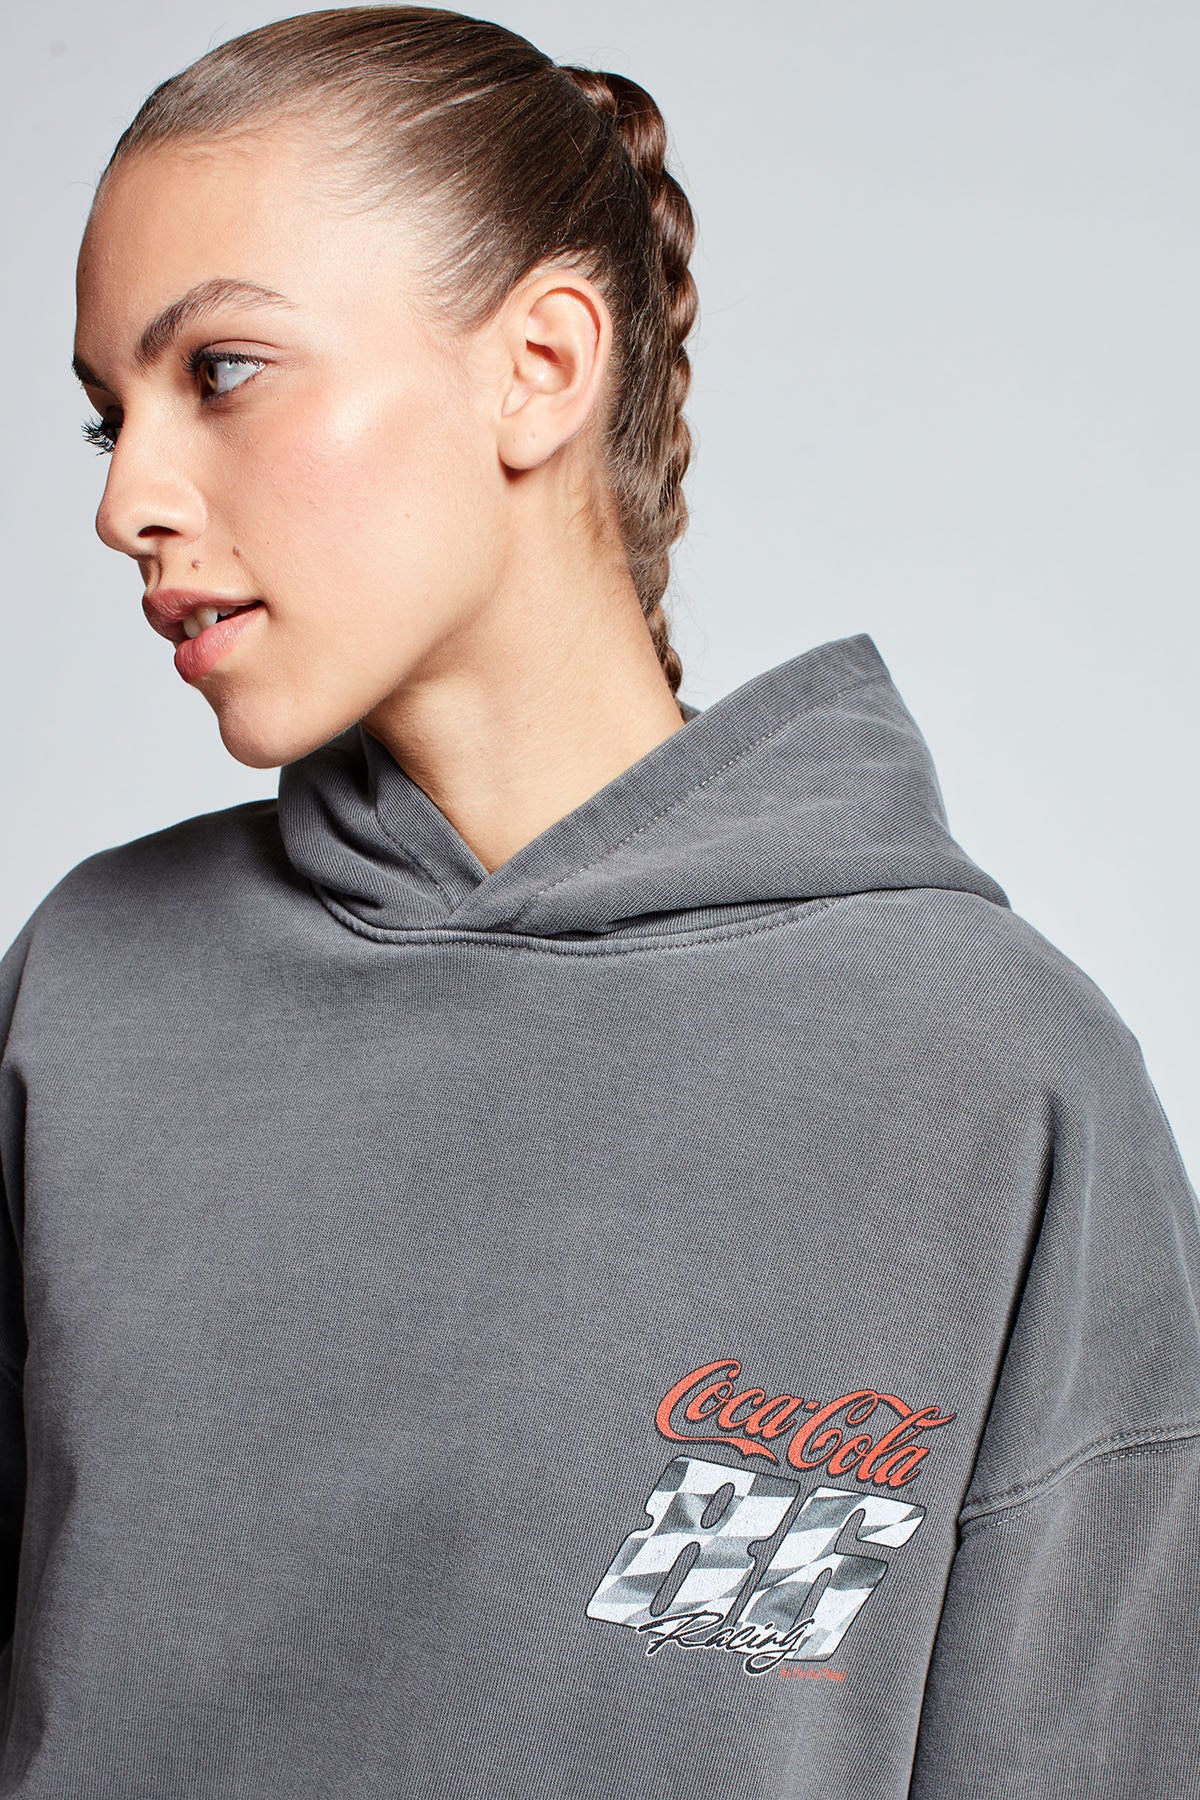 Coca-Cola Lights Out Hoodie in Washed Grey